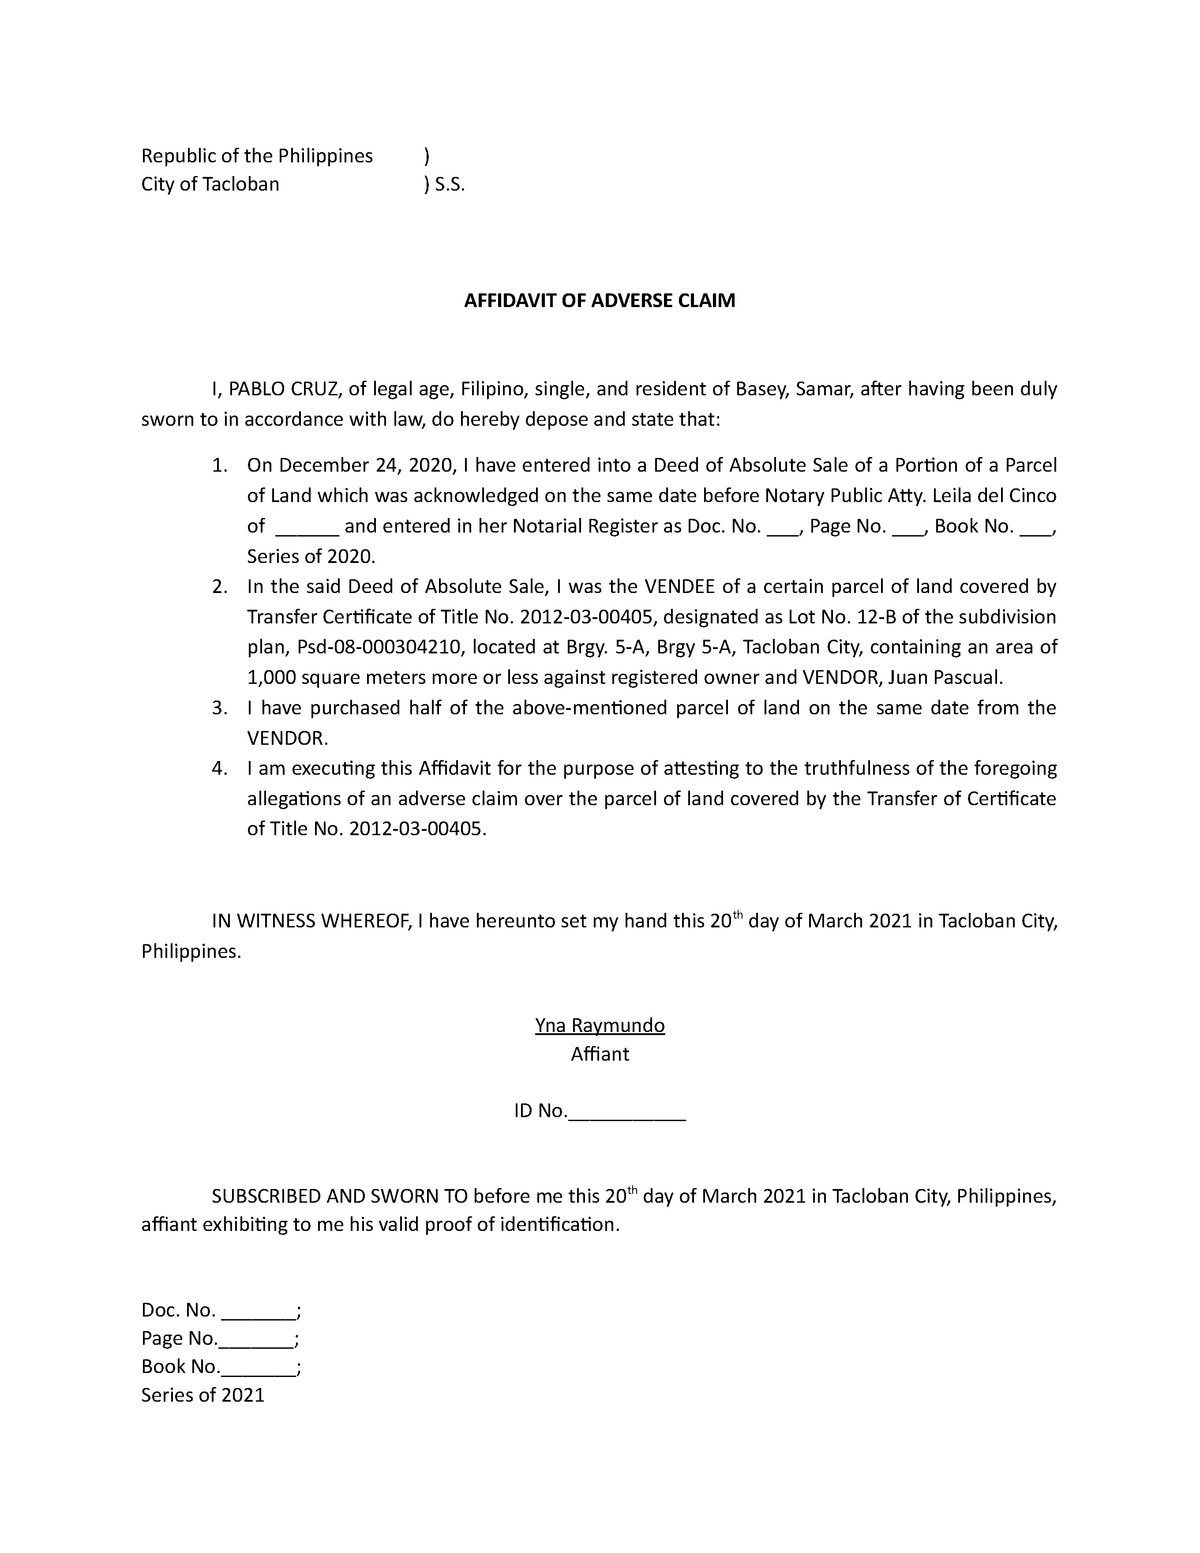 Affidavit Of Adverse Claim Sample Republic Of The Philippines City Of Tacloban S 5612